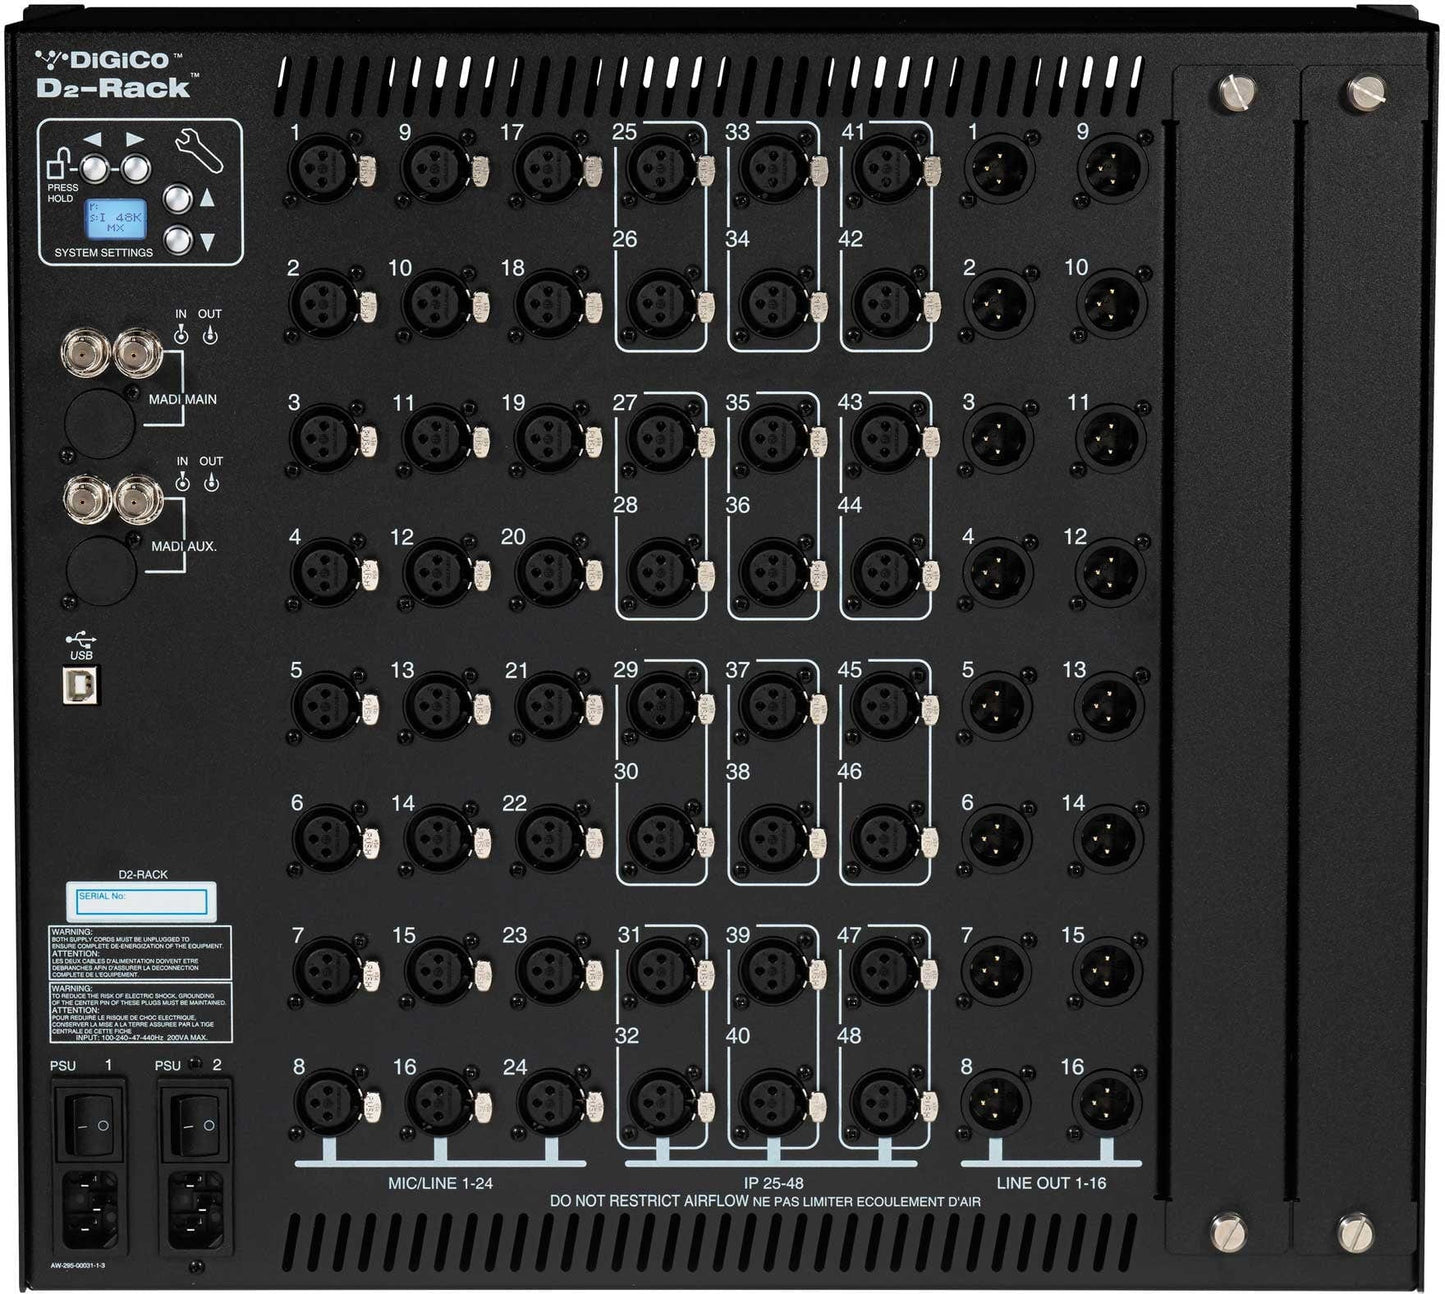 DiGiCo X-S31-D2M-B-RP S31 D2 Rack Pack with 1x MADI-DMI-B Expansion Card and 1x Blank DMI Slot - PSSL ProSound and Stage Lighting